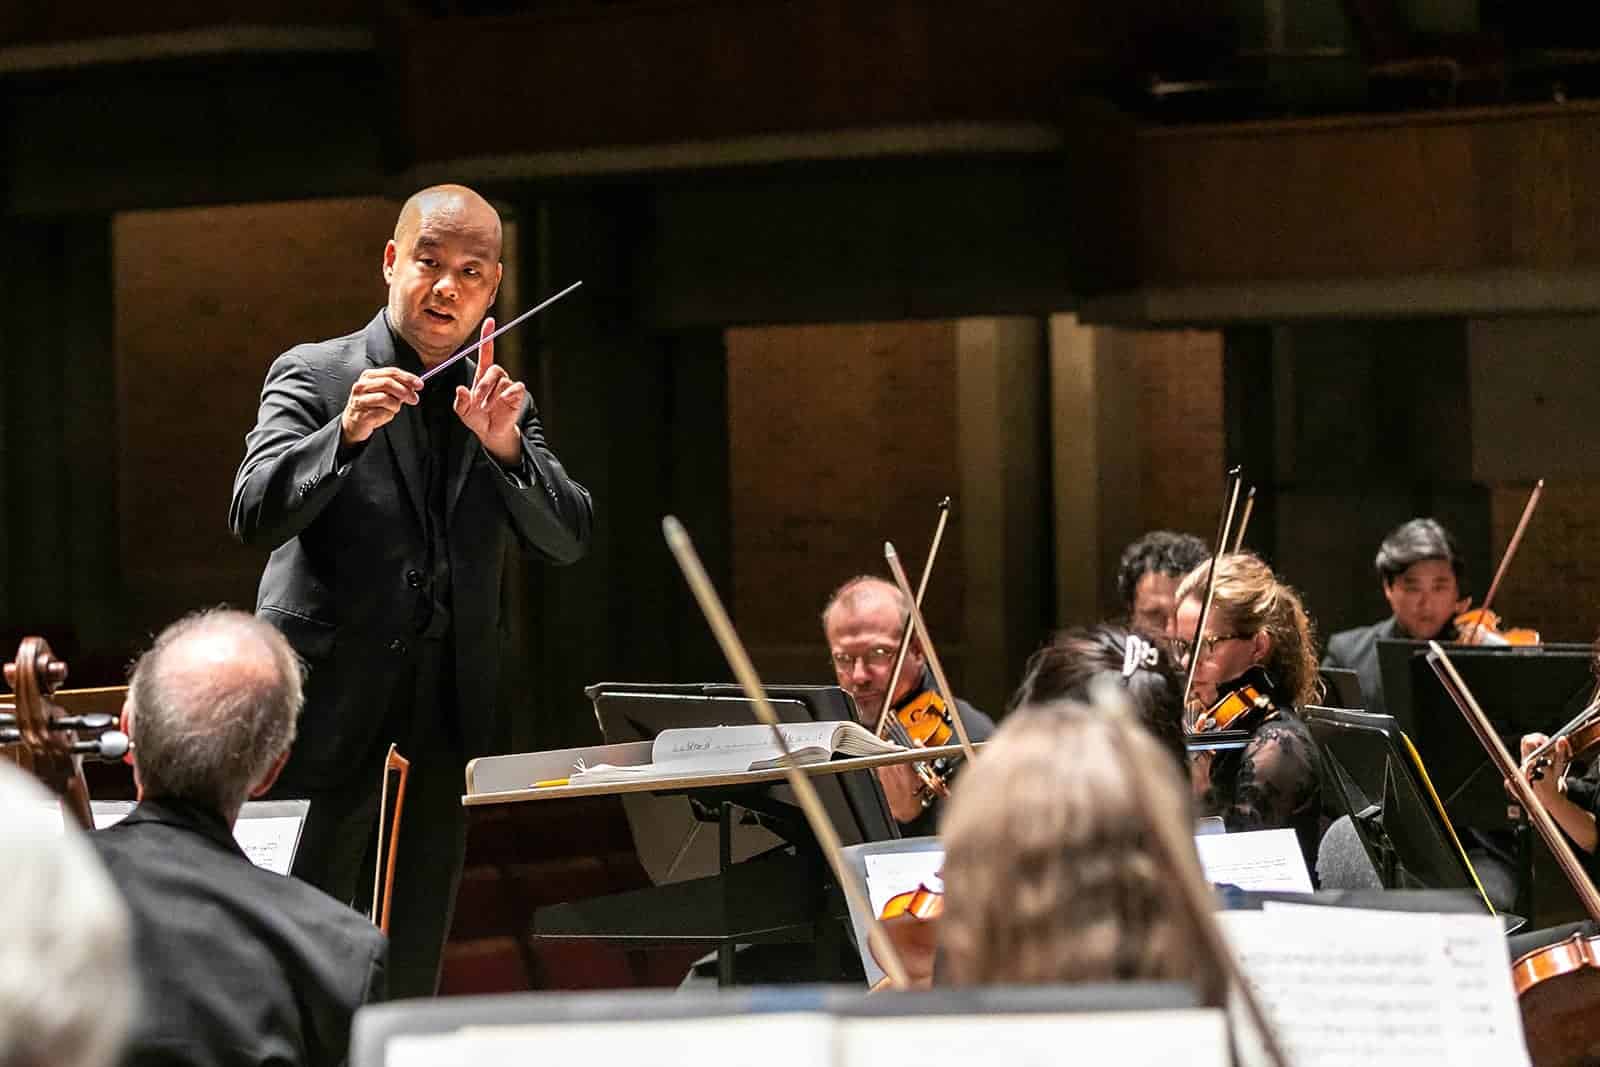 Conductor Lawrence Loh leads Symphoria’s orchestra during a performance at the Crouse-Hinds Theater at The Oncenter.